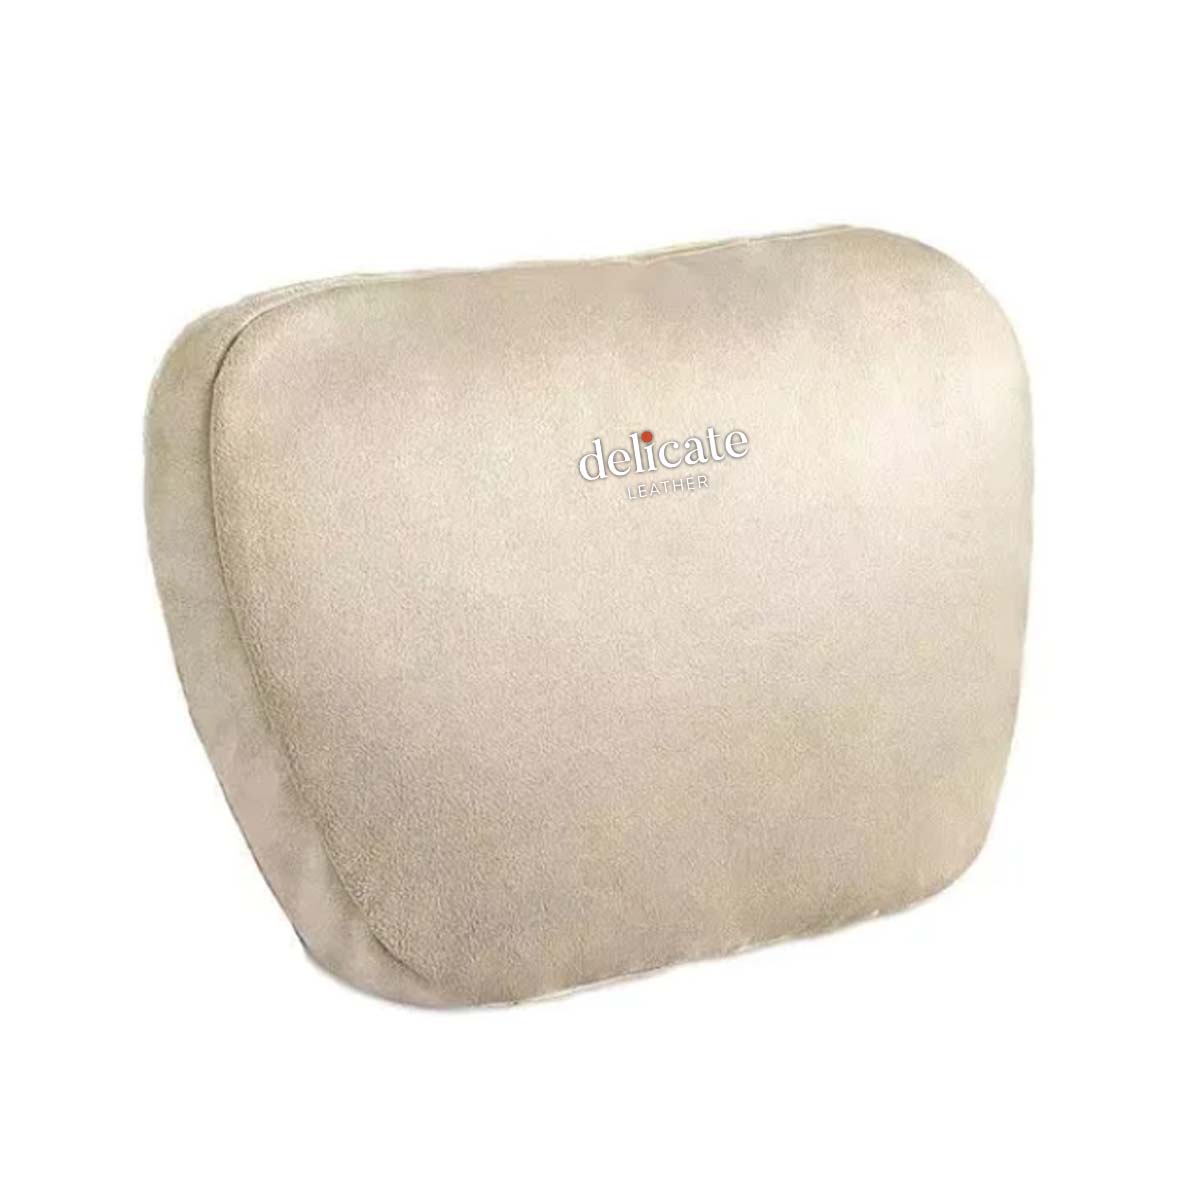 Premium Car Headrest Neck Support Seat with Lumbar Support Design: Soft, Universal, and Adjustable Car Neck Pillow and Waist Pillow for Enhanced Comfort and Ergonomics - Delicate Leather